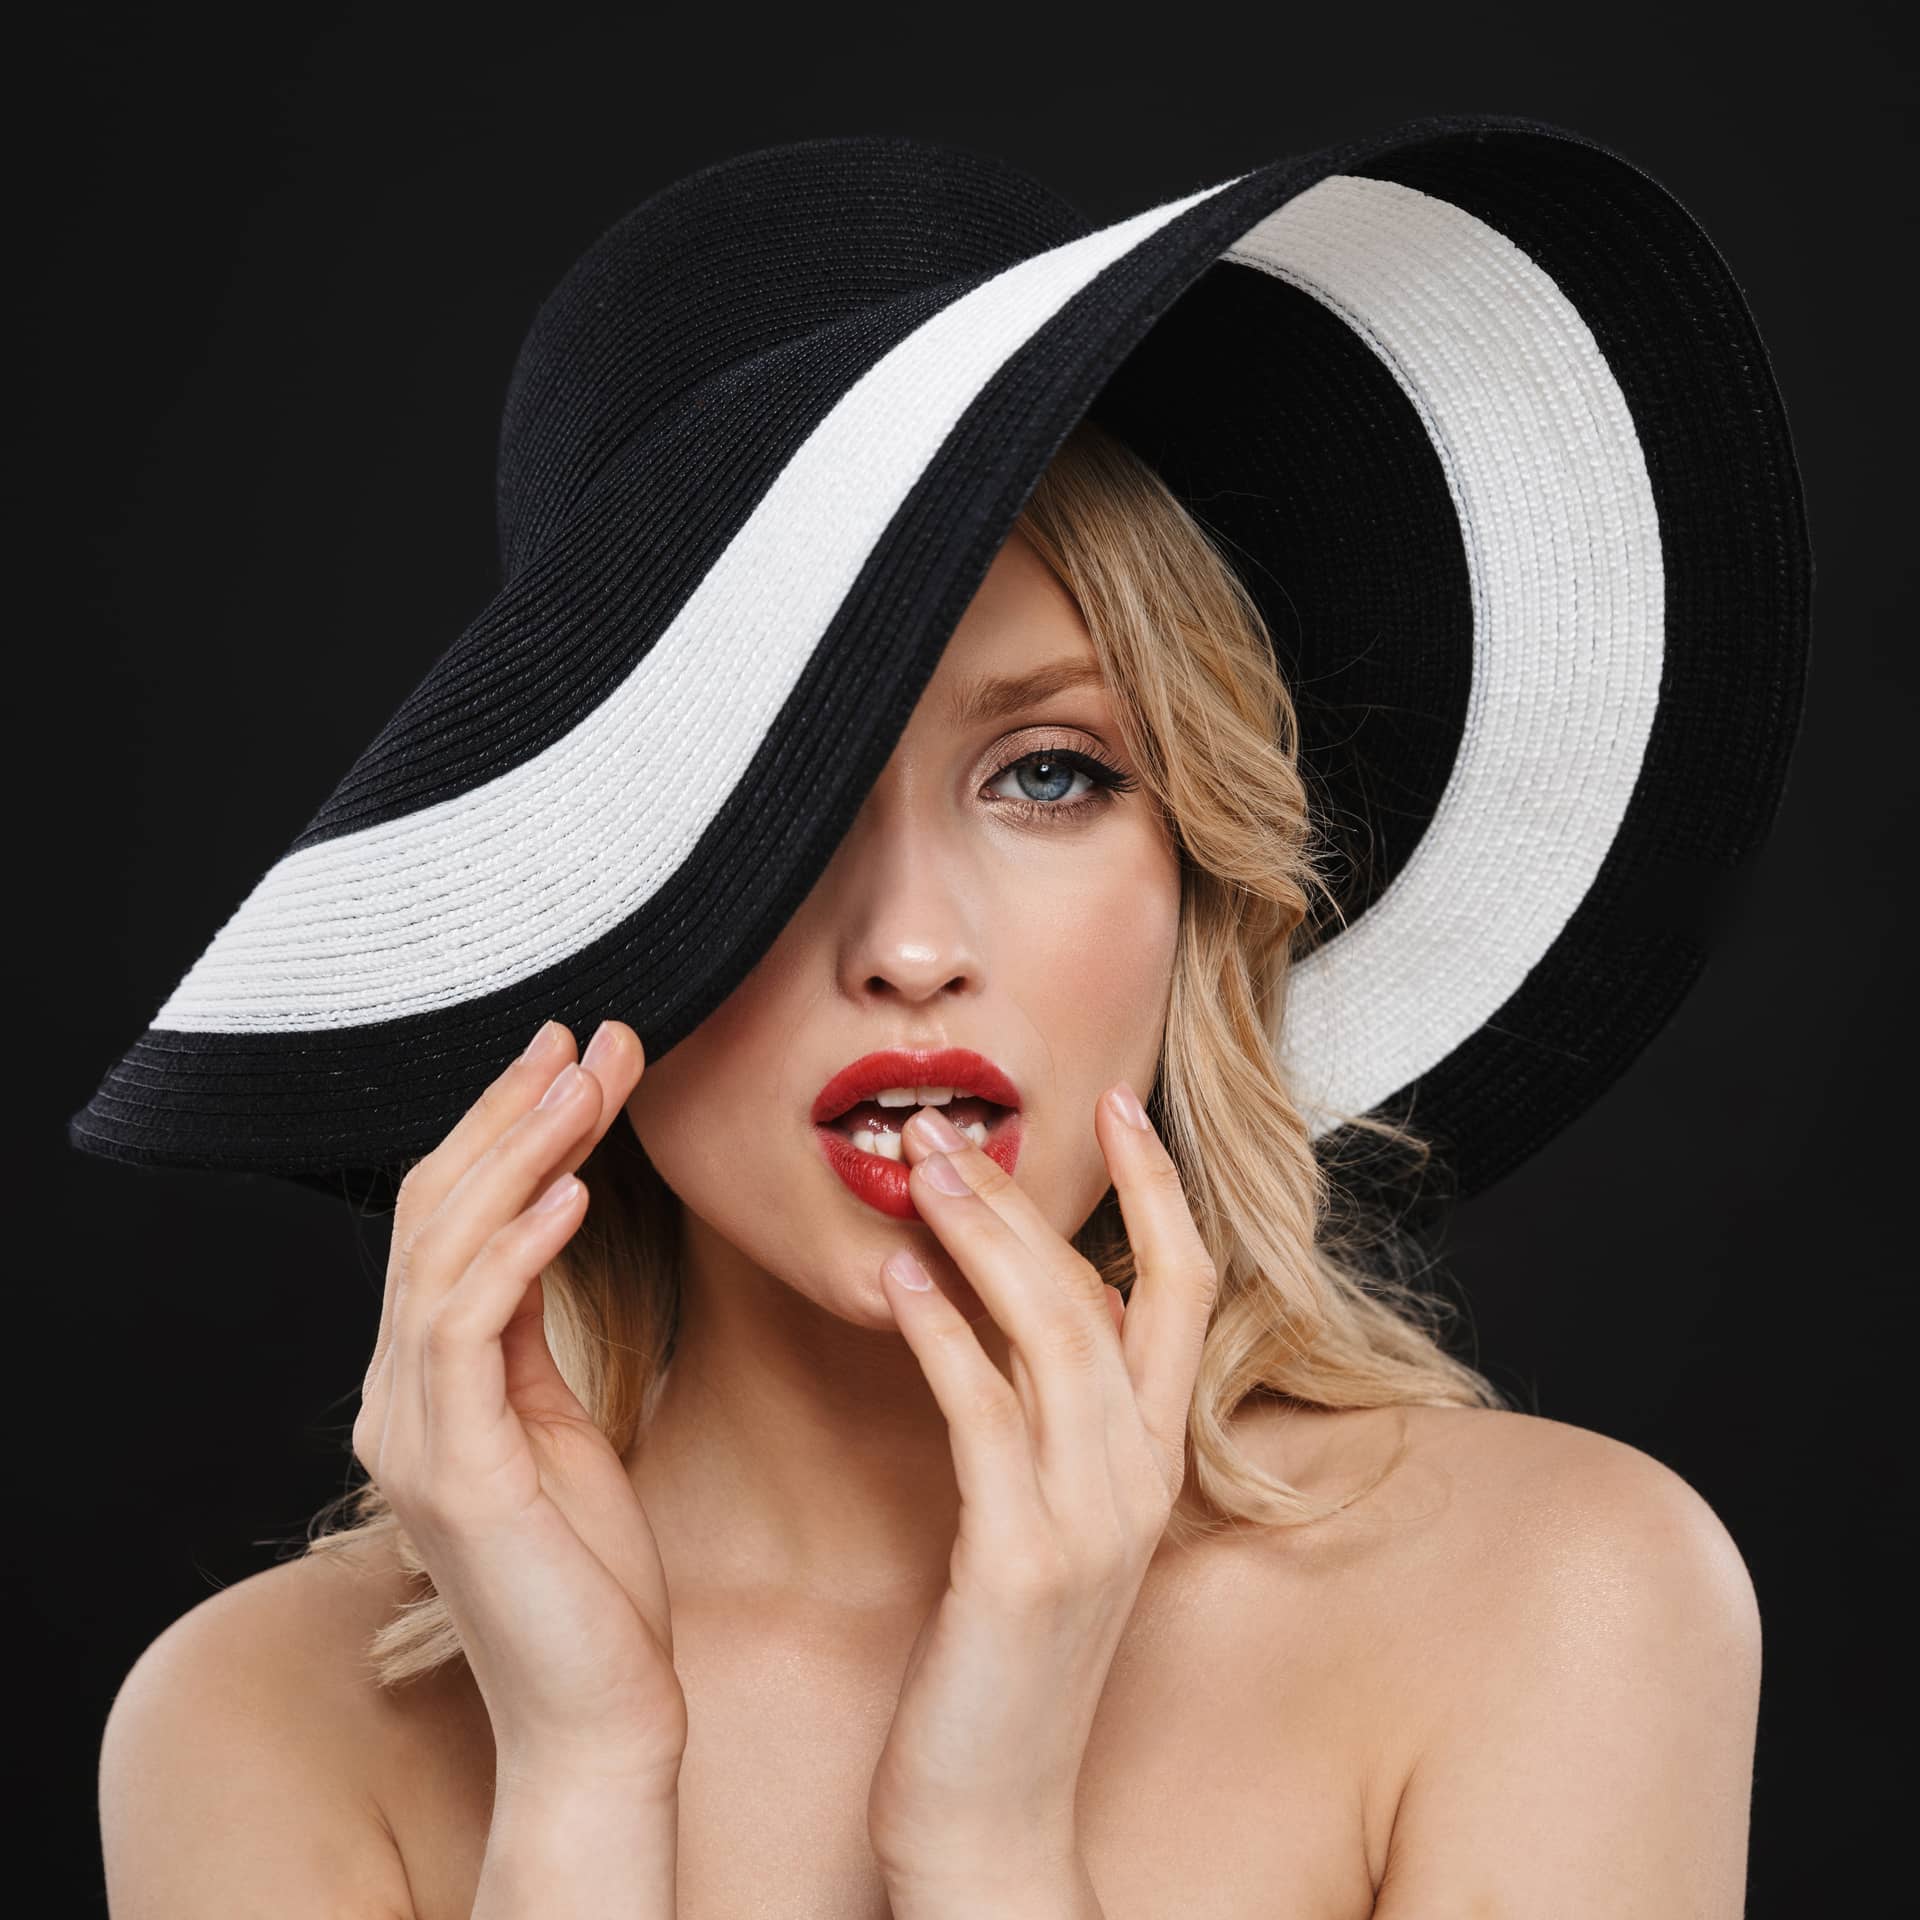 Profile photo with bright makeup red lips posing isolated wearing hat picture